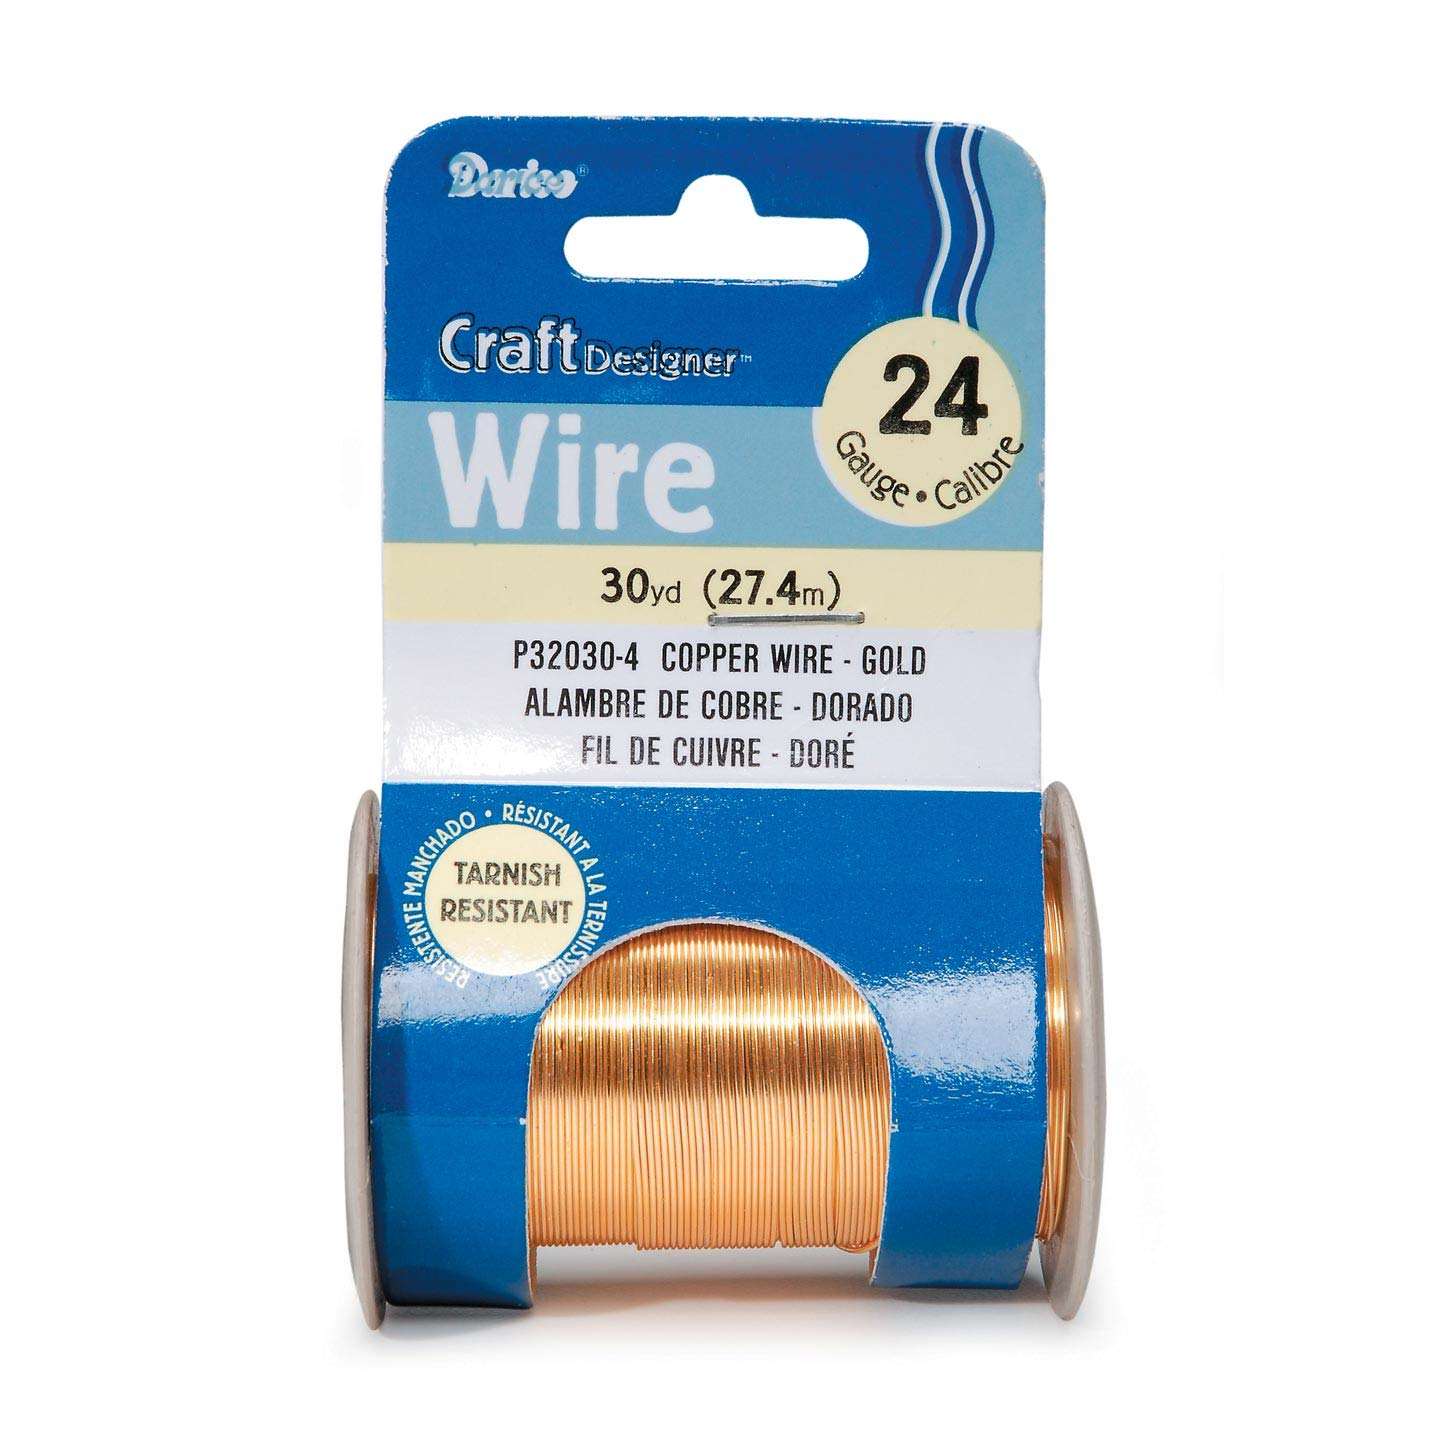 Darice 24 Gauge Caliber Craft Designer Wire 30 yd (27.4 m) - Gold - for crafting projects, beading, jewelry, ornaments, ming trees, wire sculptures, and more! - Hatke